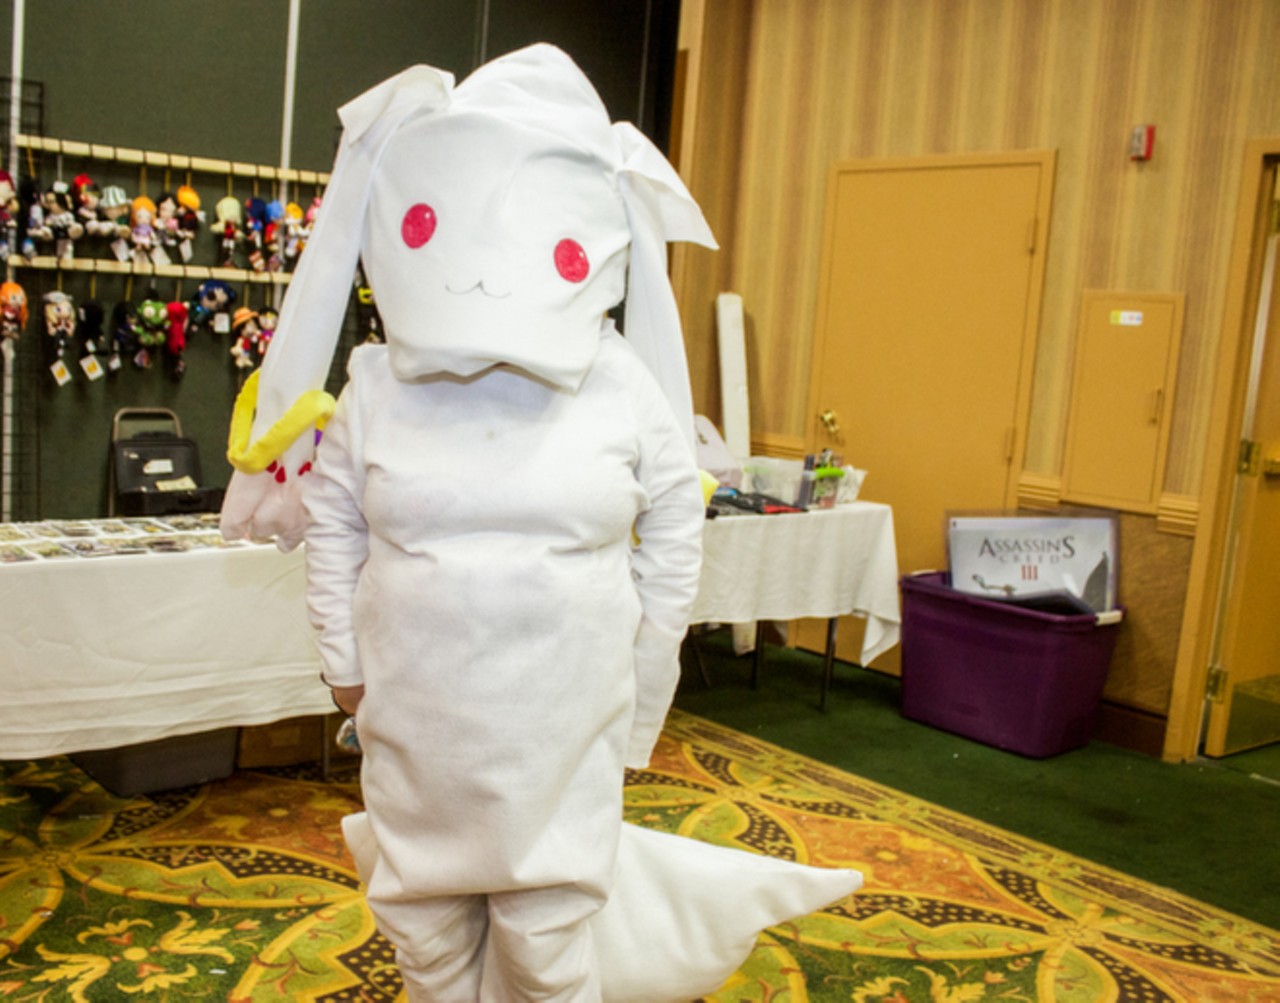 50 most eyecatching photos from Florida Anime Experience